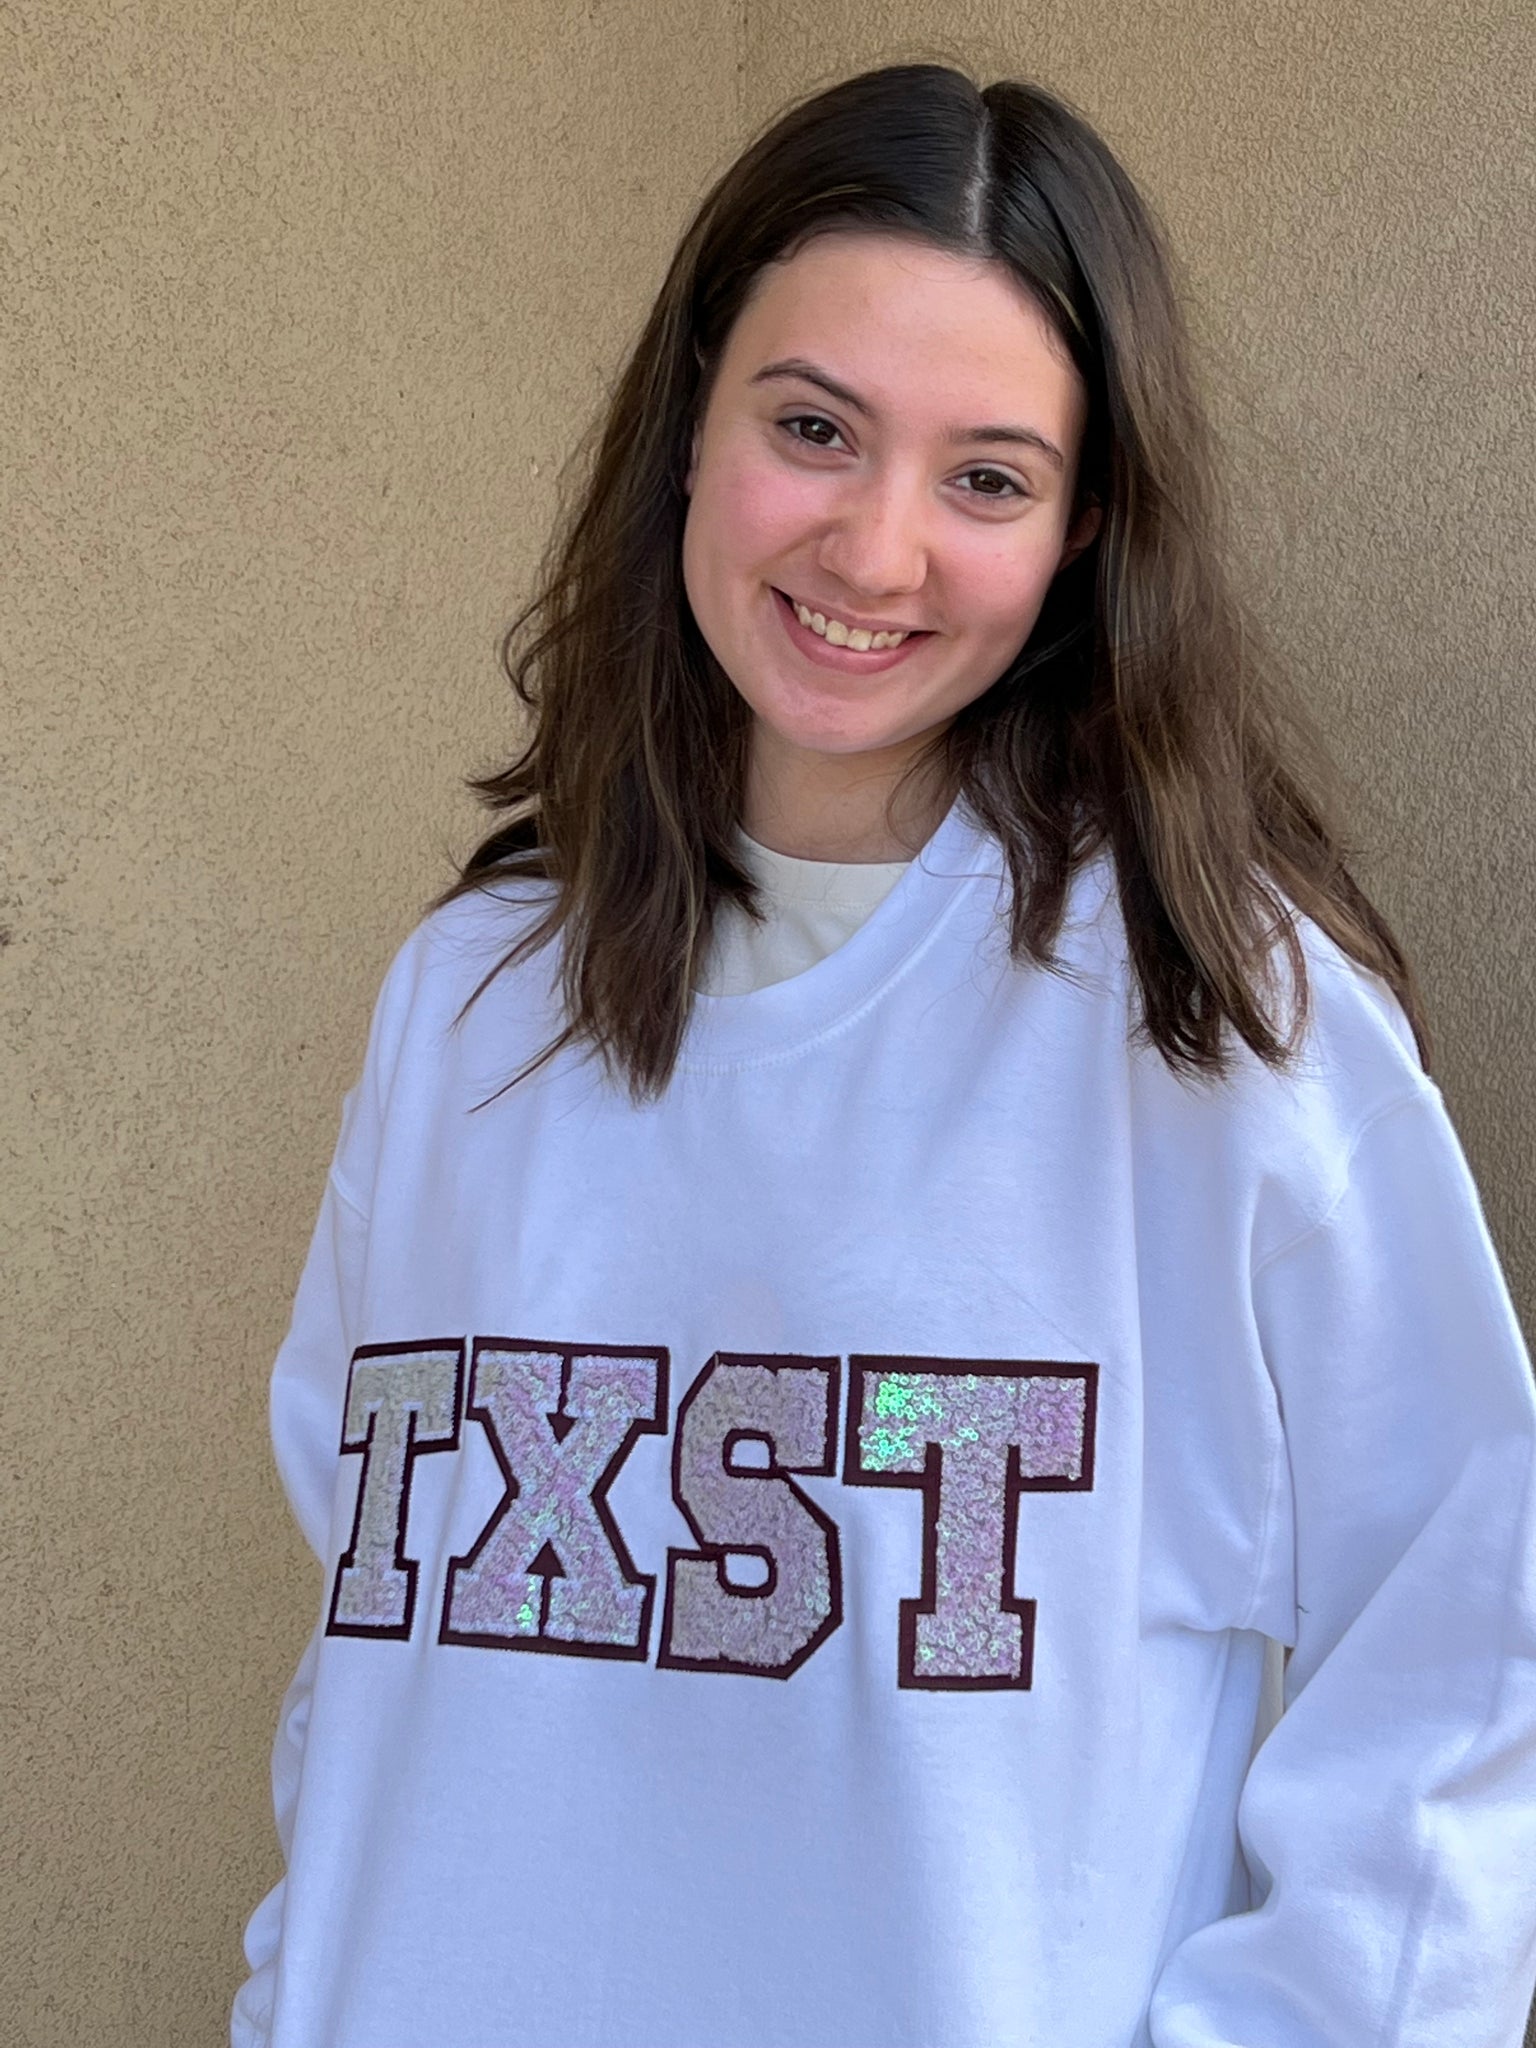 TXST Iridescent Sequined Stitch Letter with Maroon Background on a White Sweatshirt